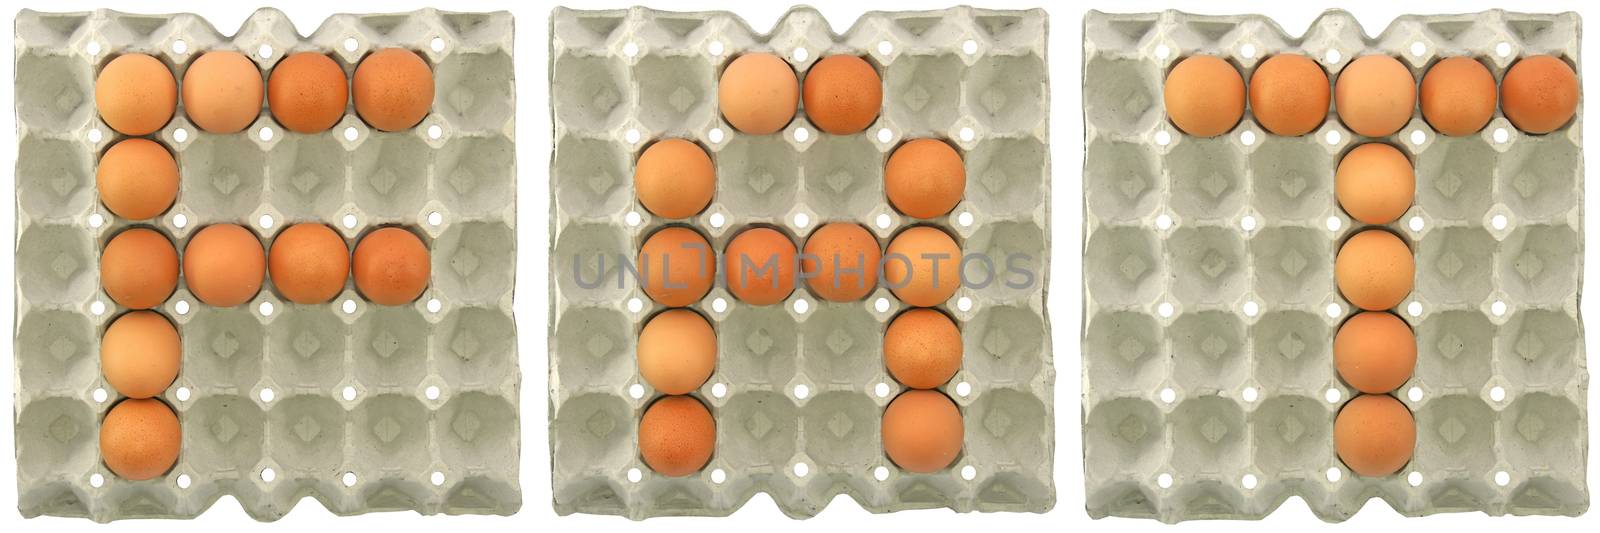 FAT word from eggs in paper tray by mranucha